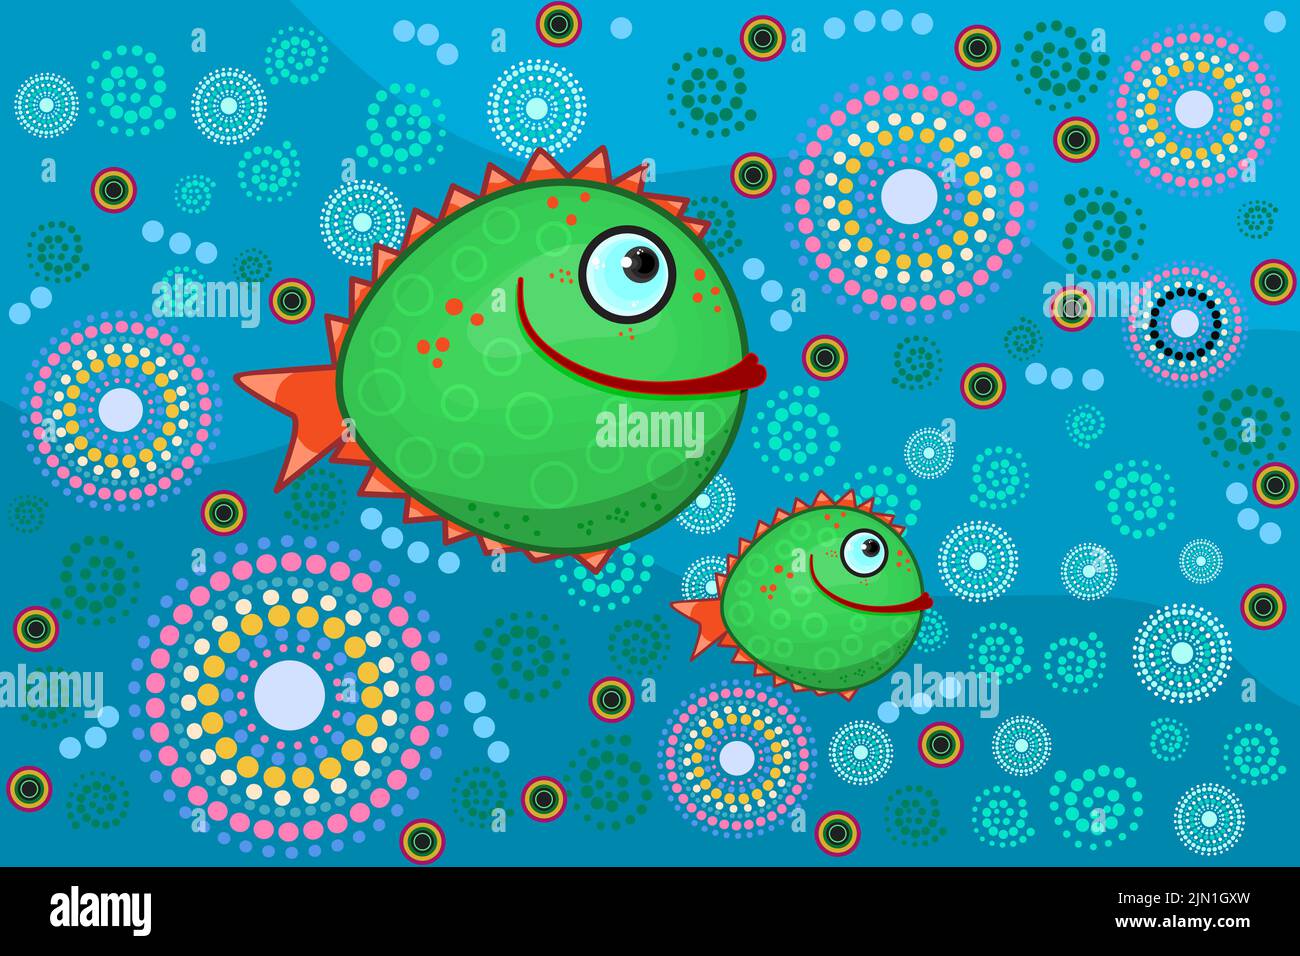 Aboriginal dot art painting with fish. Underwater life concept. Sea with fishes in decorative ethnic style. Australia aboriginal style of dot painting Stock Vector